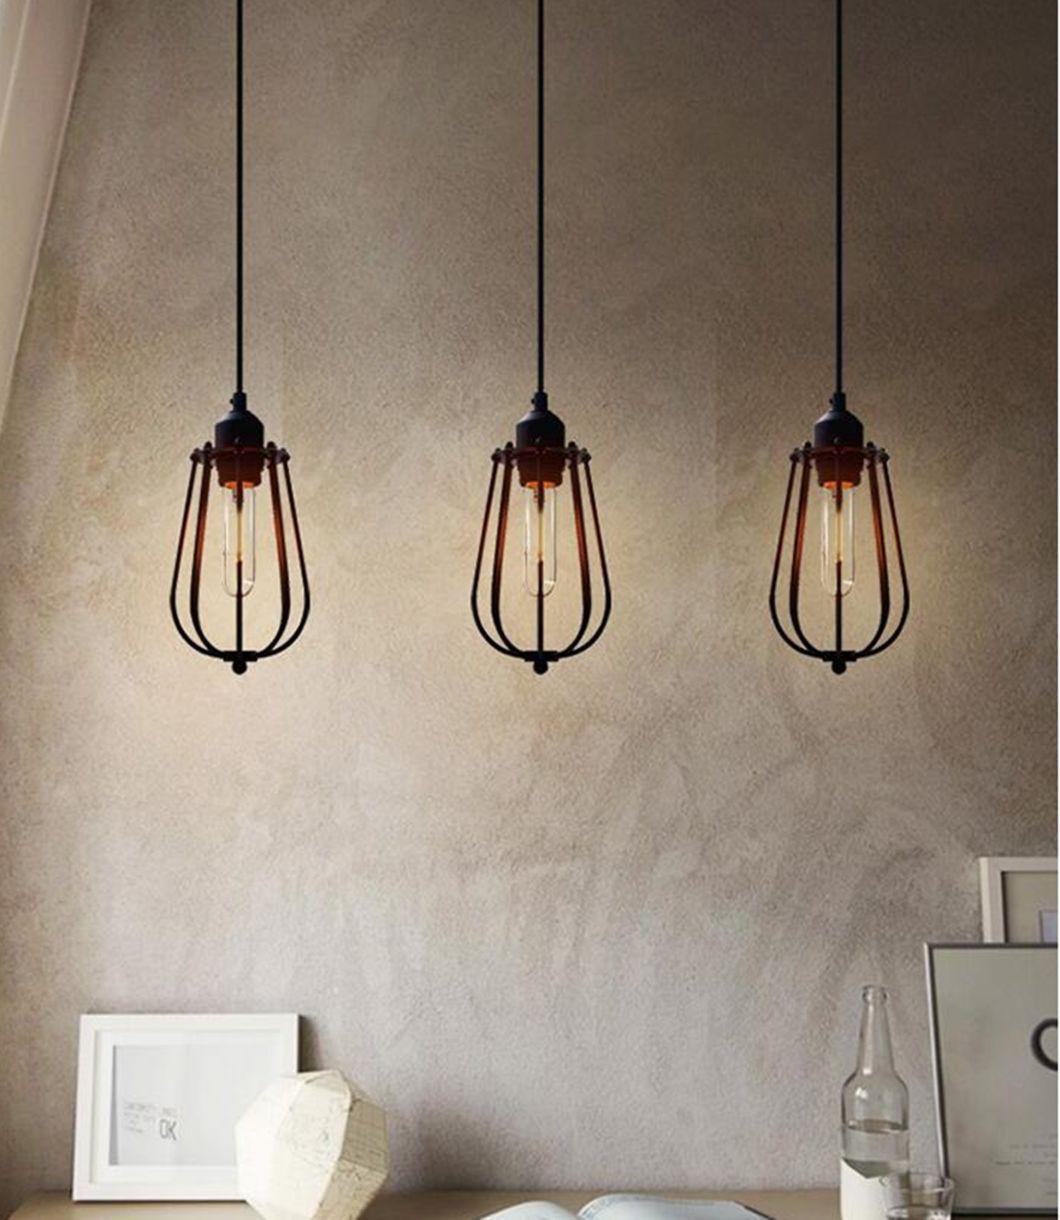 Rustic Old Classic Iron Vintage Suspended Edison Light Ceiling Chandelier